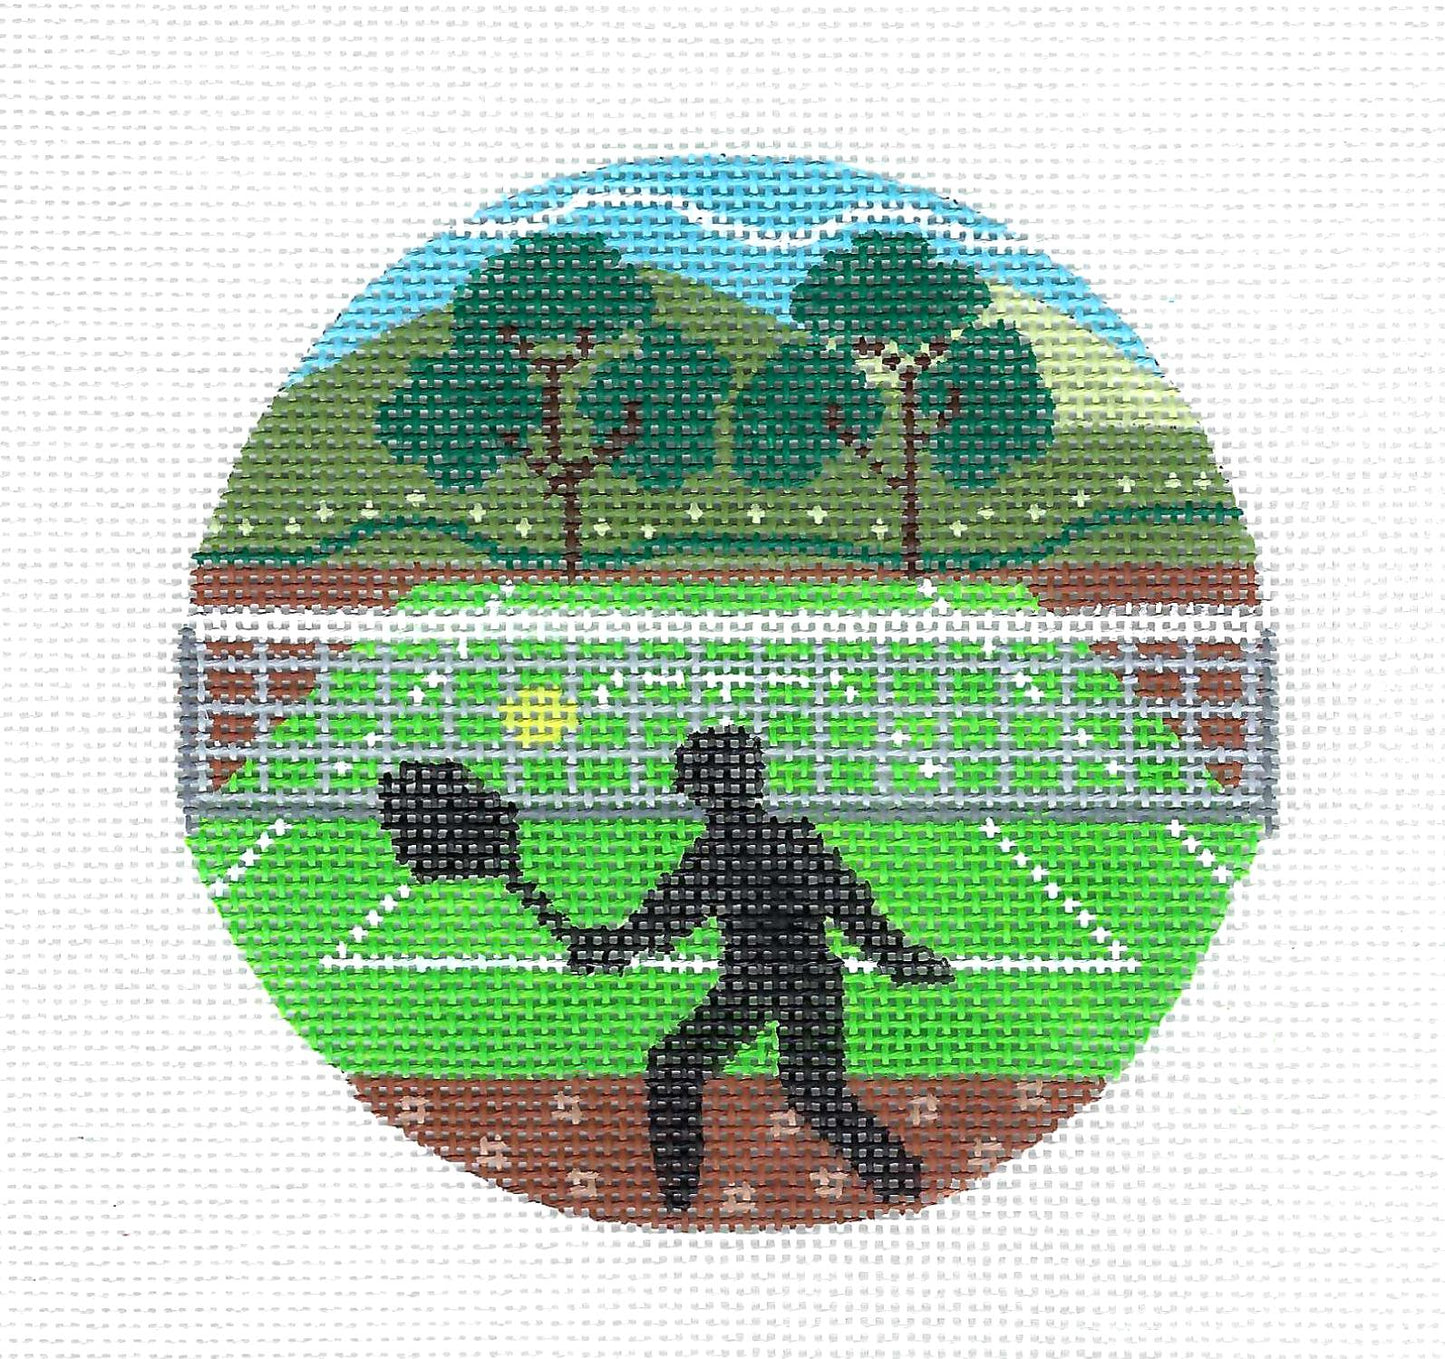 Dramatic Sports ~ TENNIS ~ handpainted Needlepoint Canvas Ornament by CH Design from Danji